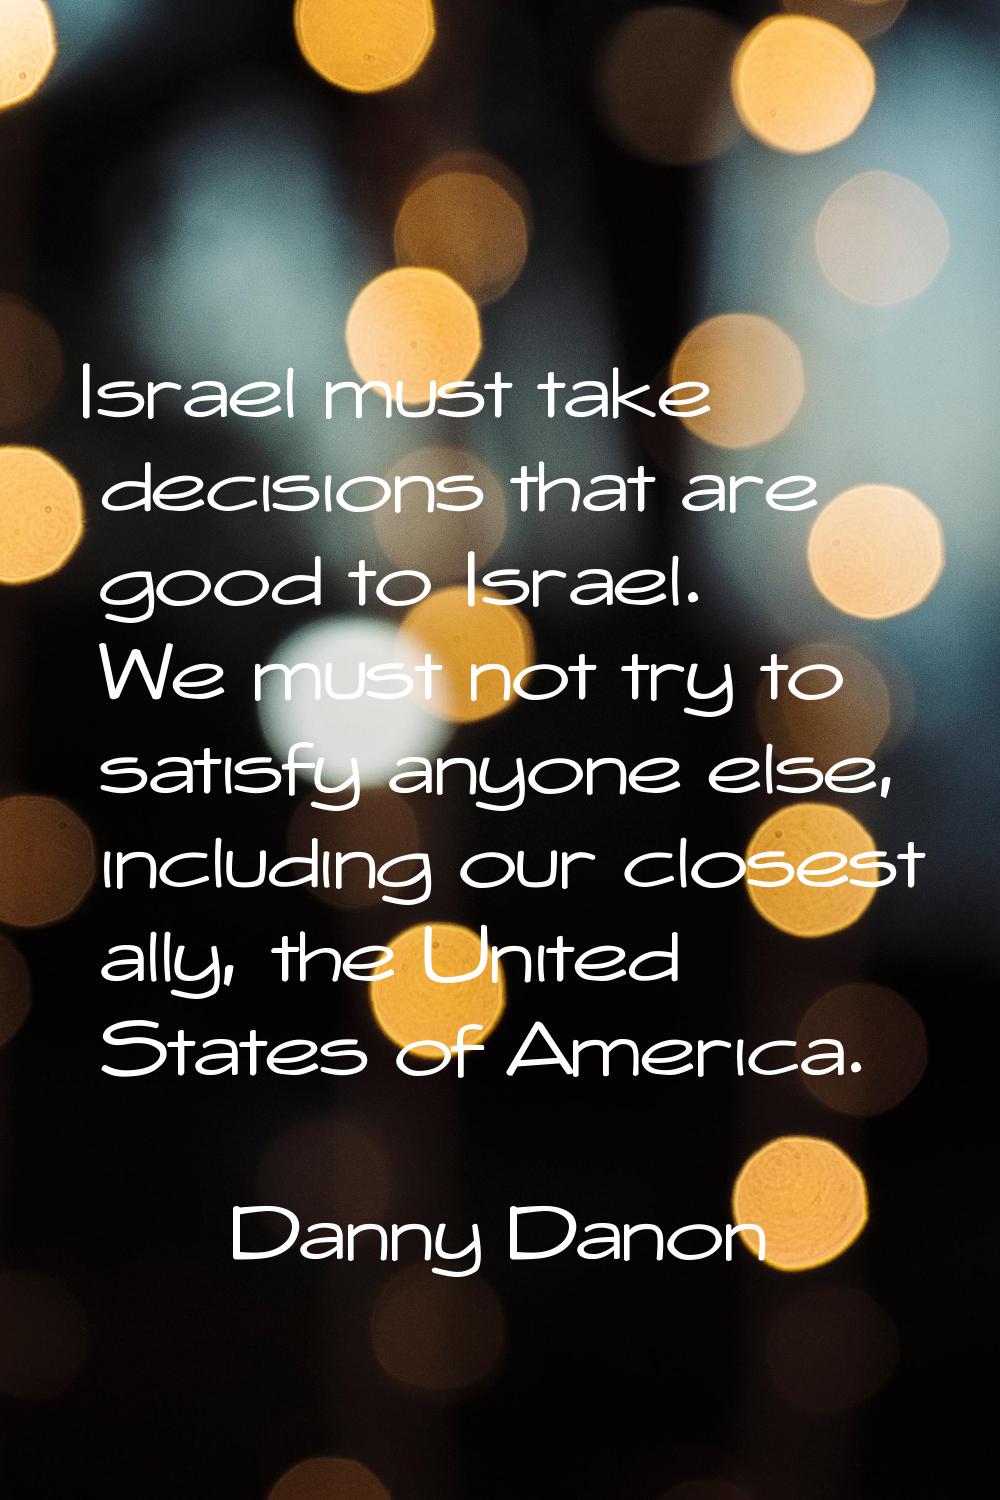 Israel must take decisions that are good to Israel. We must not try to satisfy anyone else, includi